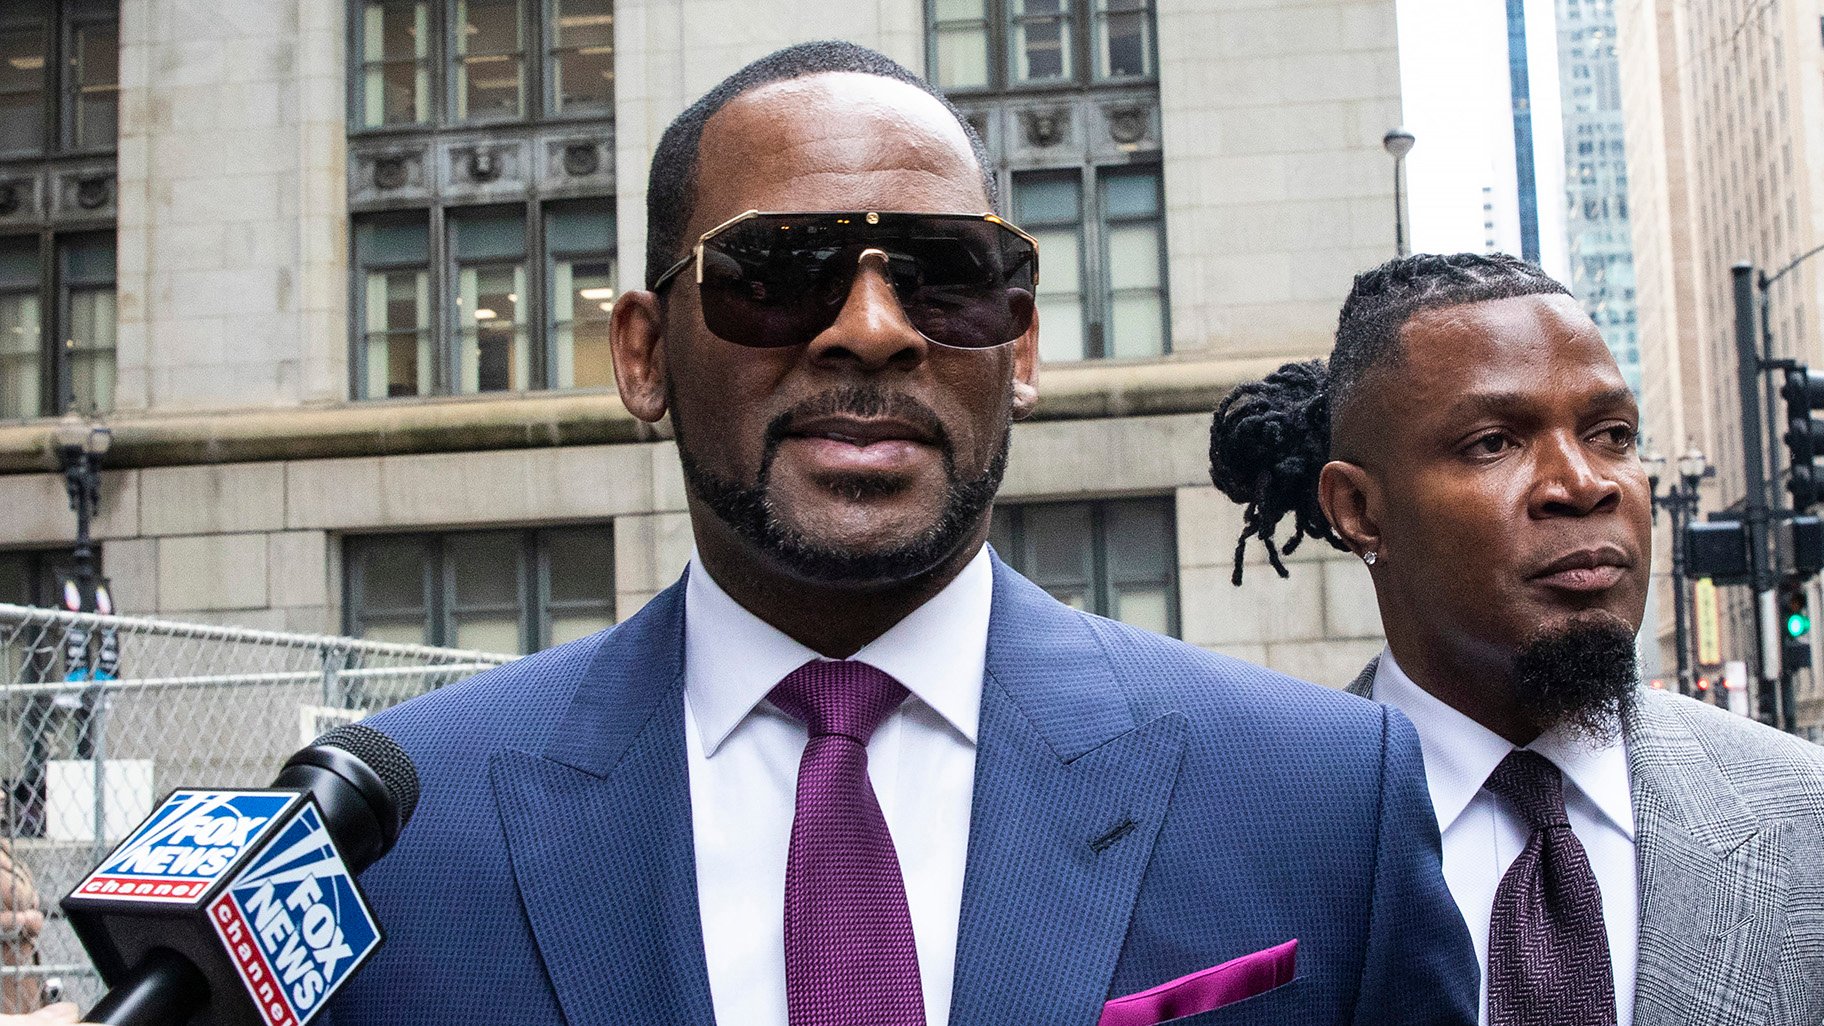 R. Kelly and his publicist Darryll Johnson, right, leave The Daley Center after an appearance in court for Kelly’s child support case on Wednesday, March 13, 2019. (Ashlee Rezin / Chicago Sun-Times via AP)